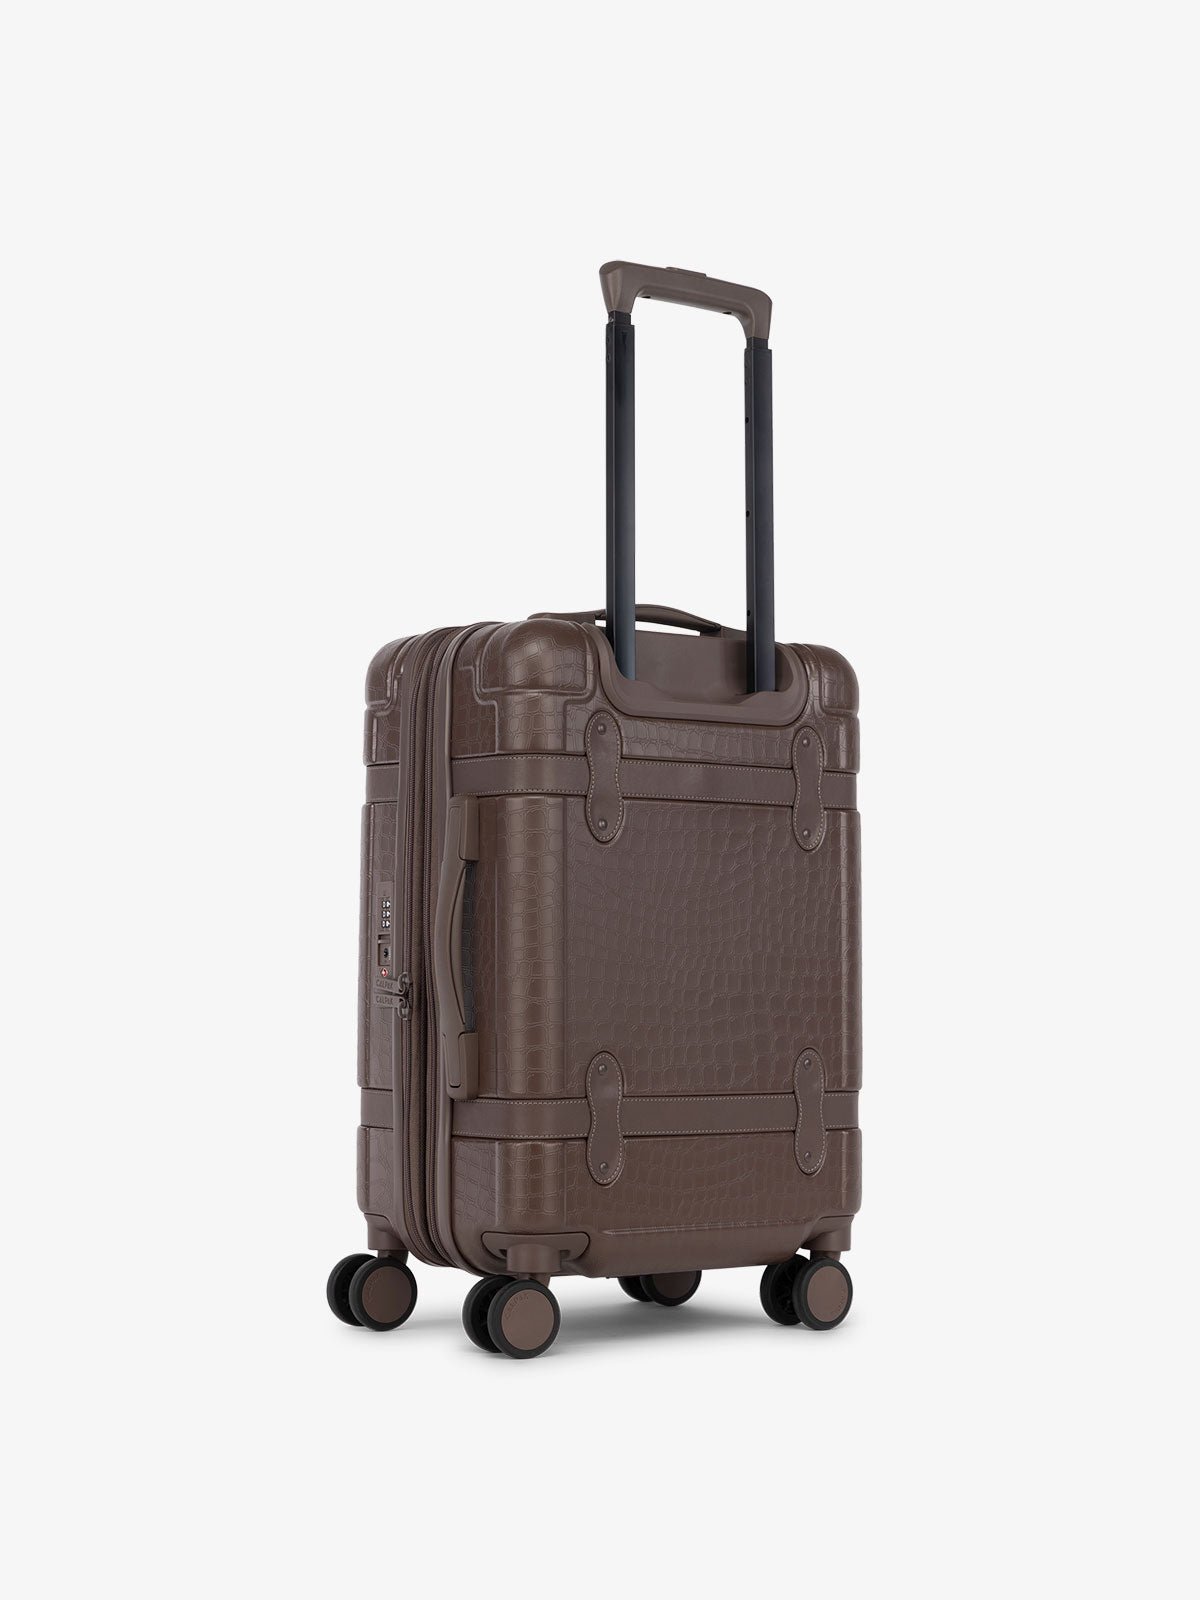 CALPAK TRNK 20 inch carry on suitcase with hardshell exterior, tsa lock and top and side handles in espresso